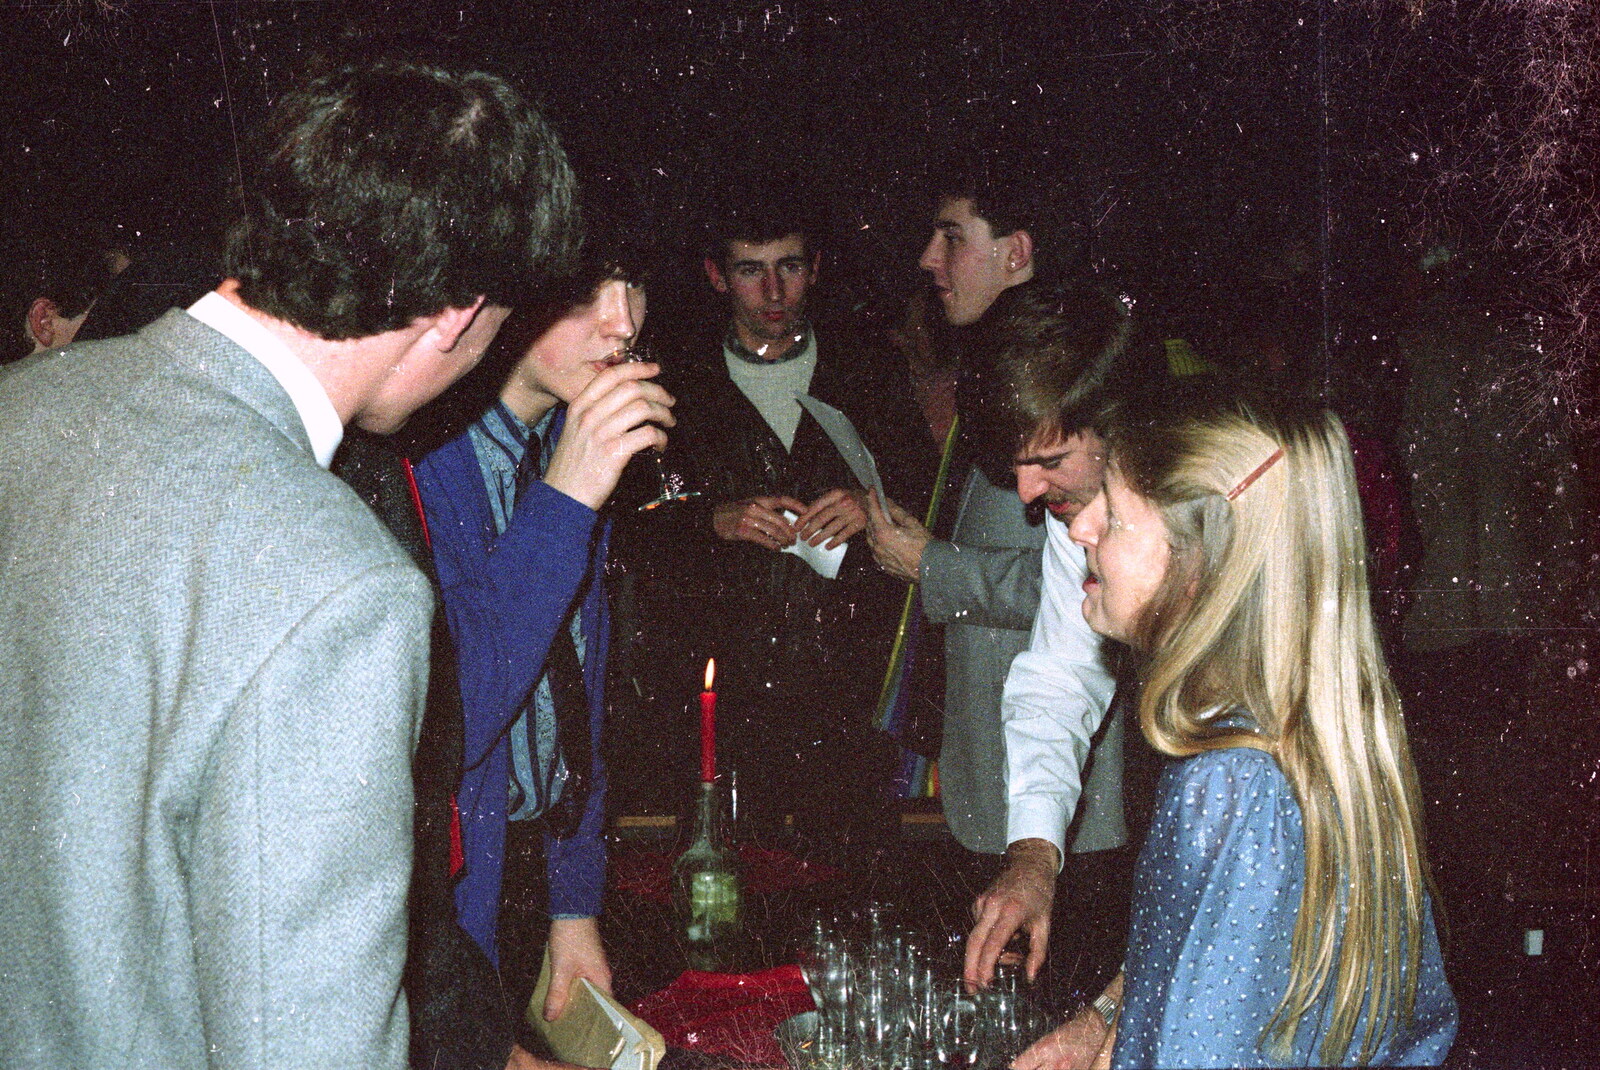 Drinks are served from Brockenhurst College Presentation and Christmas, Hampshire - 19th December 1985